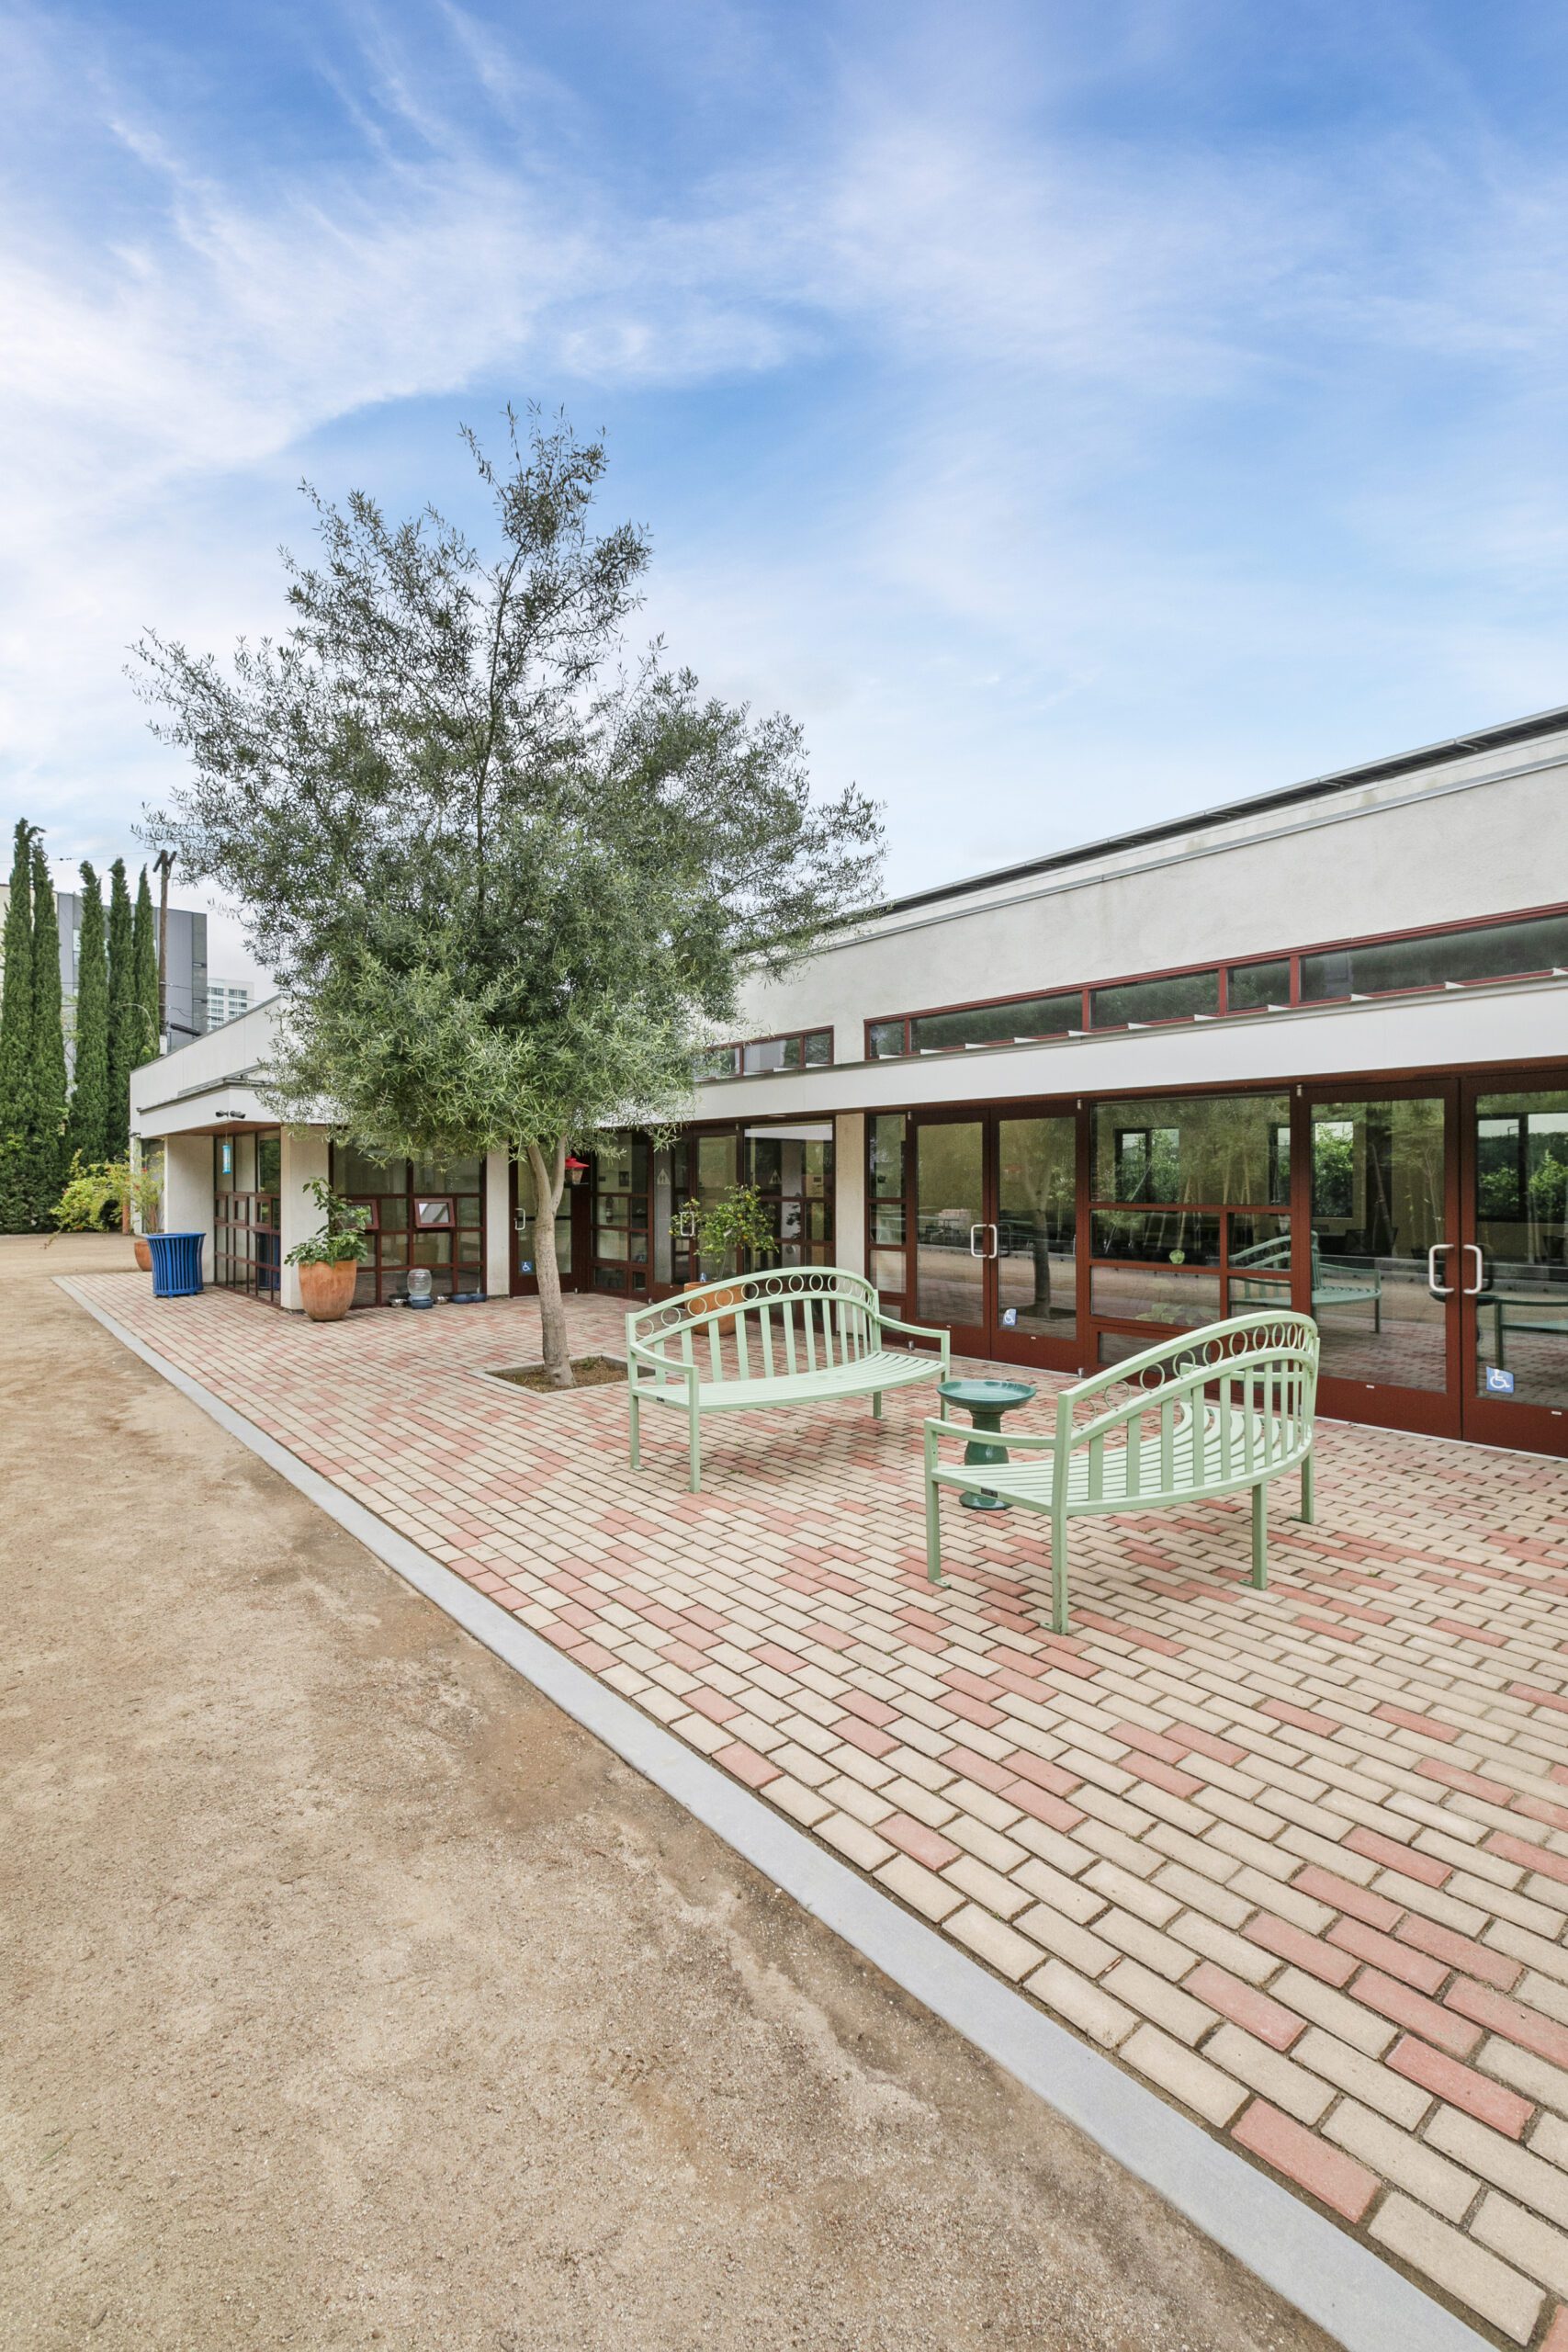 Exterior photo of the courtyard of 1741 Cherokee, a office campus in prime Hollywood.